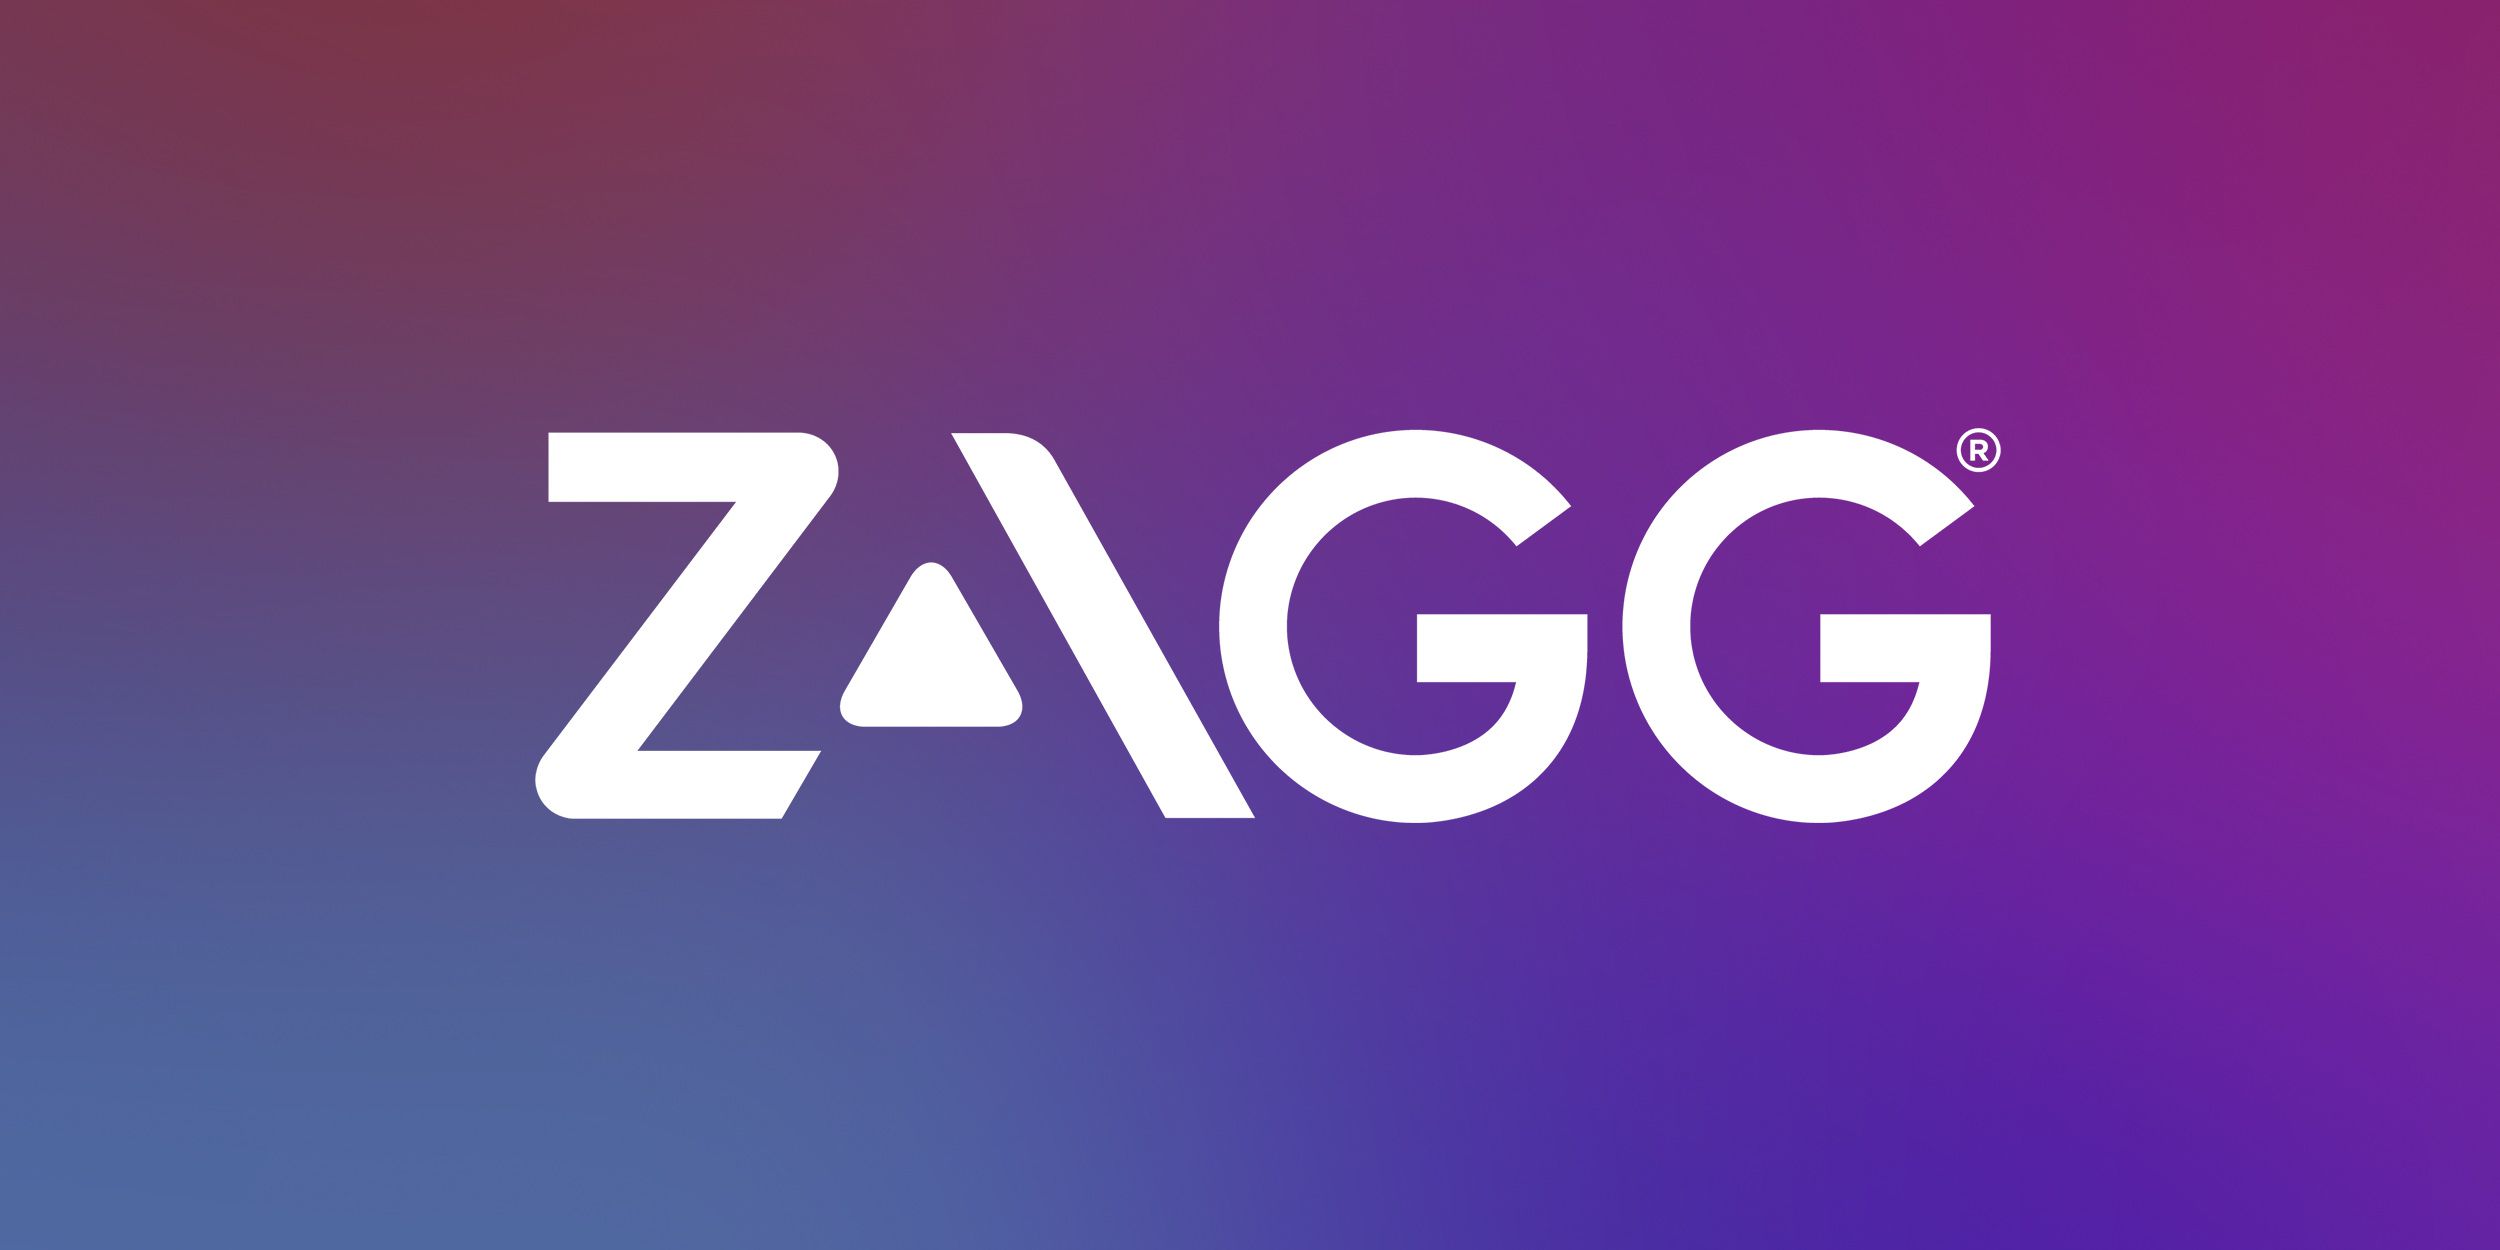 Deals: ZAGG’s New 25% Off Sitewide Sale Has Low Prices on Mophie Chargers and More